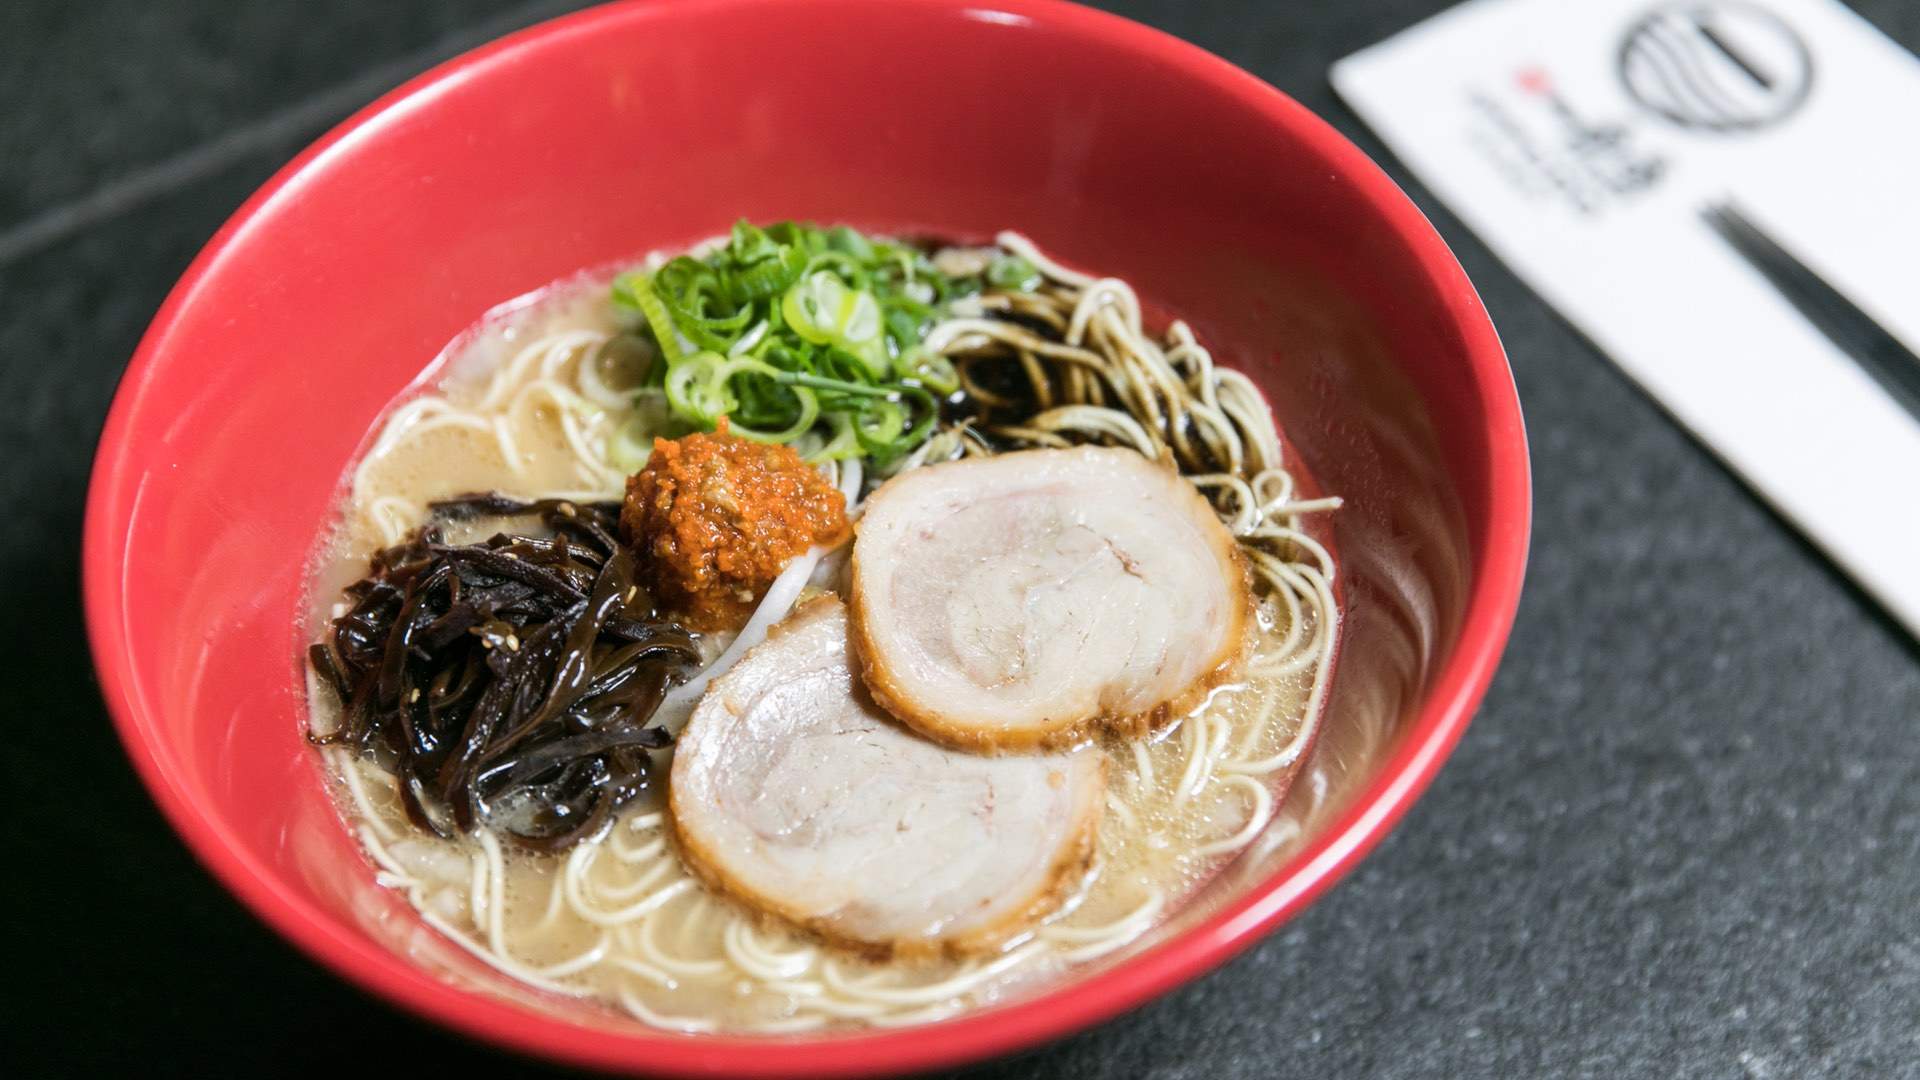 World Renowned Ramen Joint Ippudo Has Finally Opened in Auckland